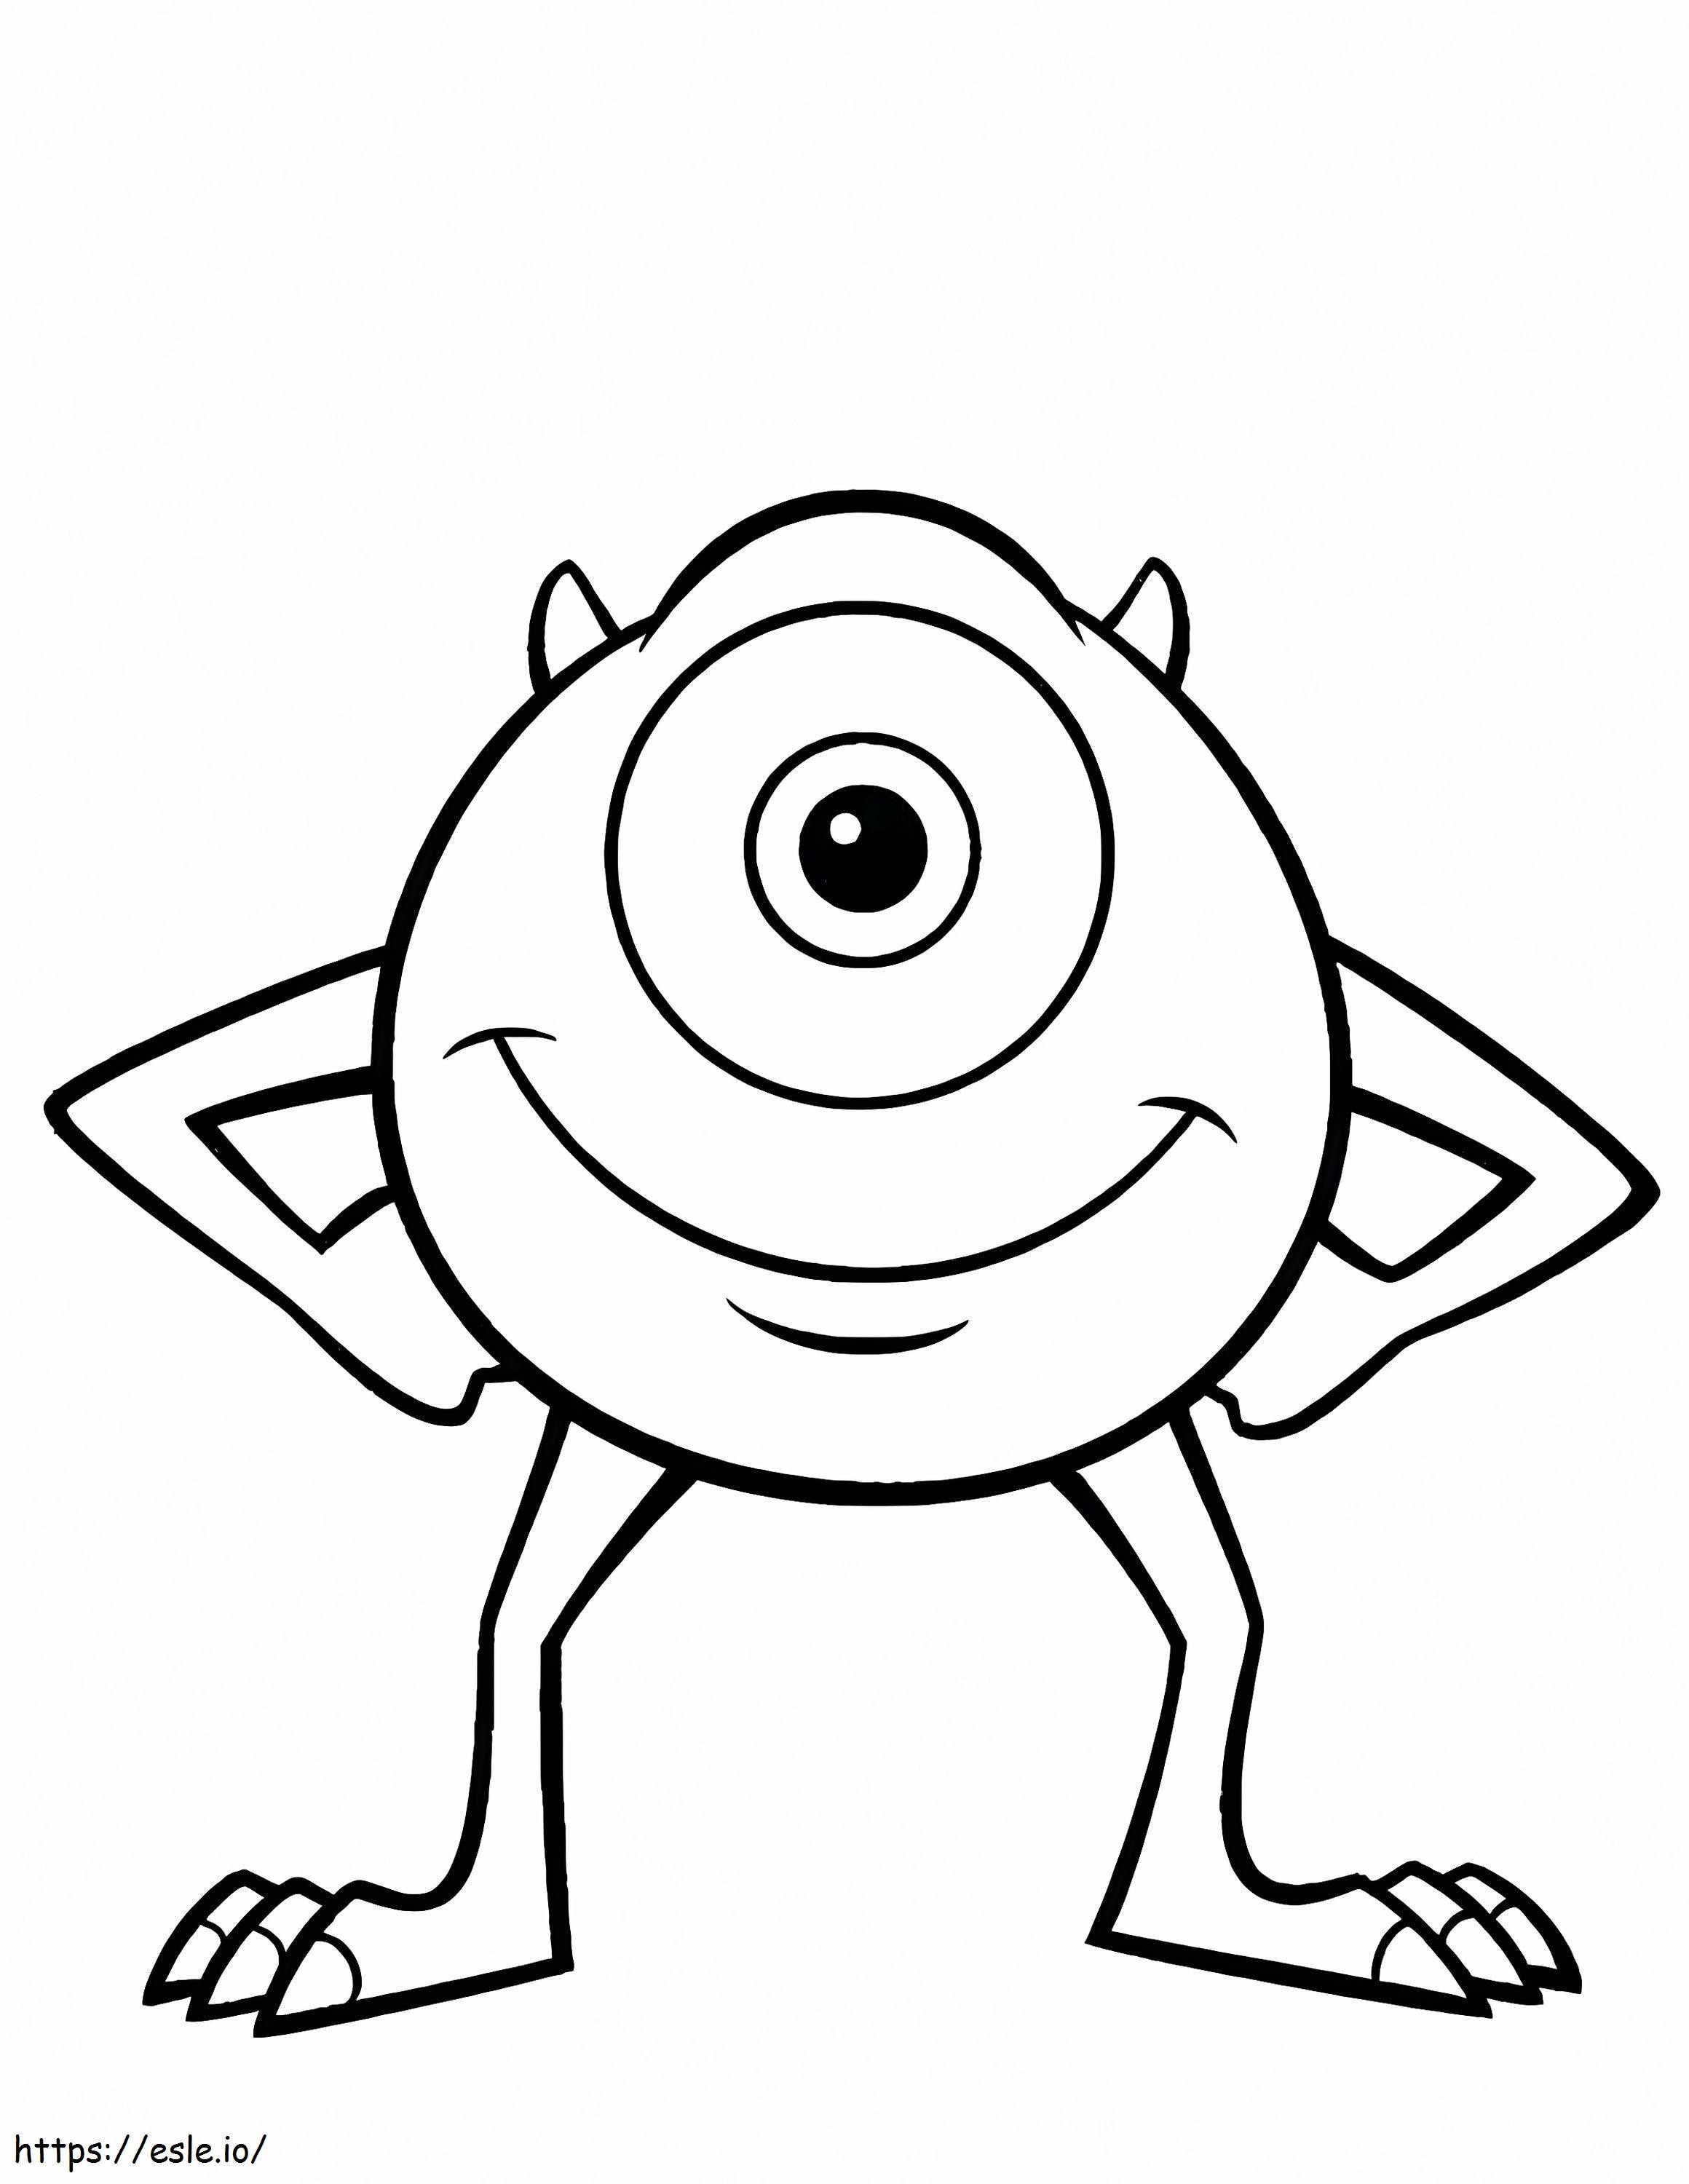 1531971919 Mike Smiling A4 coloring page